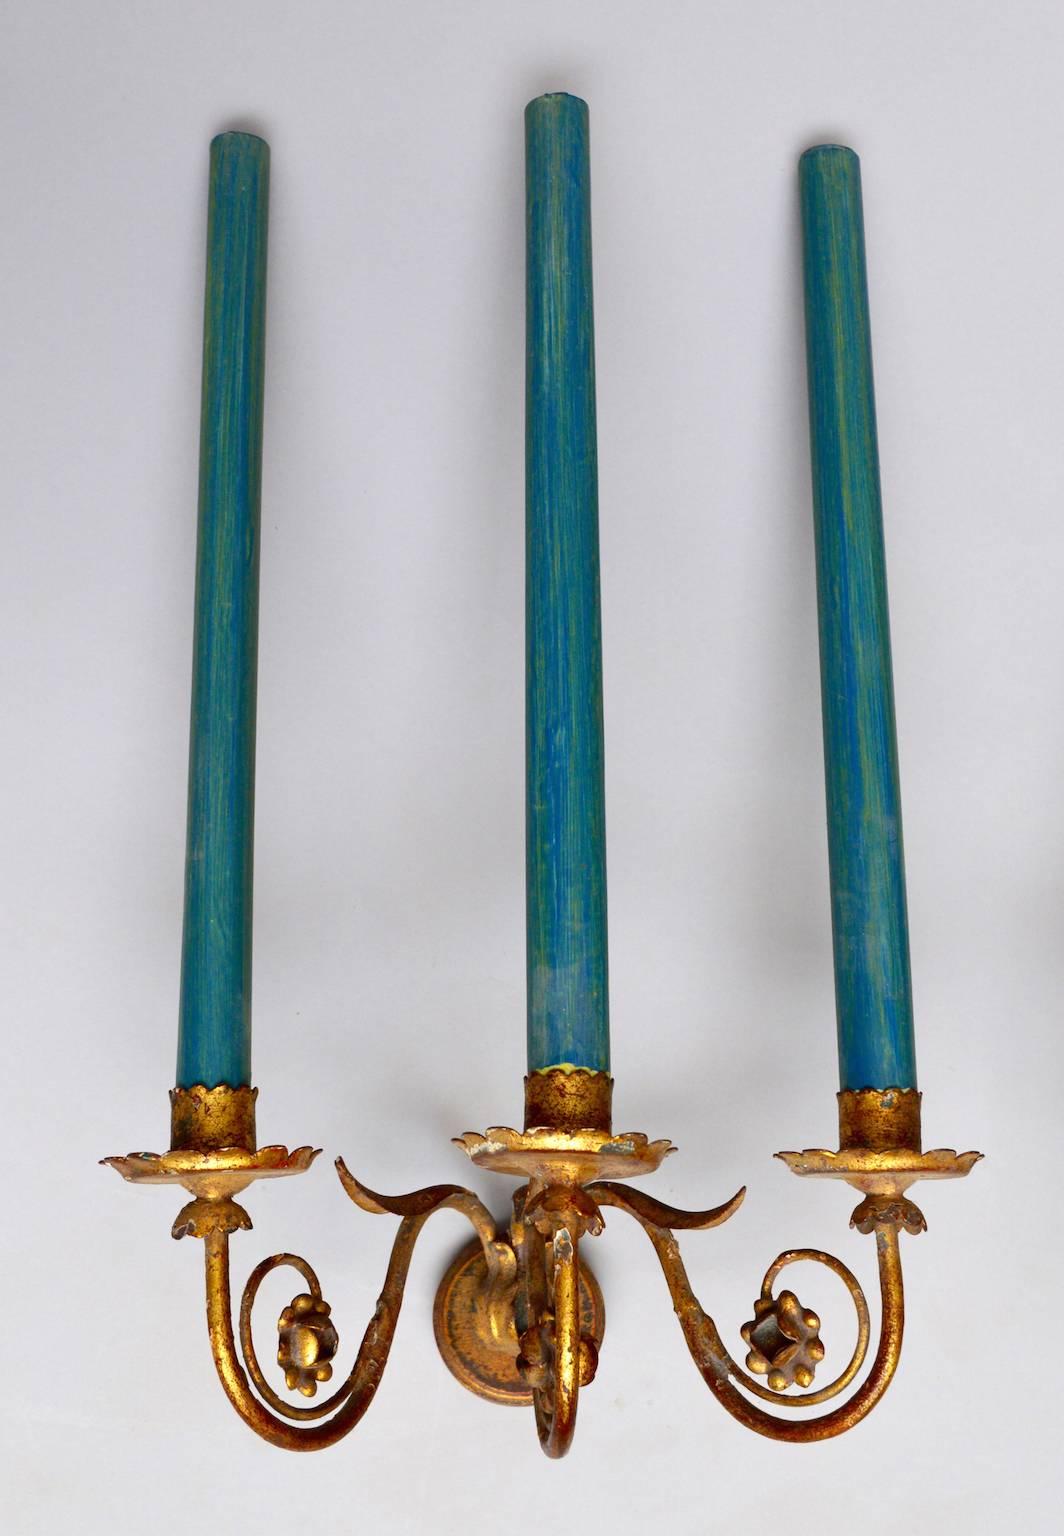 Pair of 1930s Italian gold leafed tole and hand-wrought iron sconces.
Elongated paper and wax faux candles disguise the electric sockets.
In very good condition and ready to install.